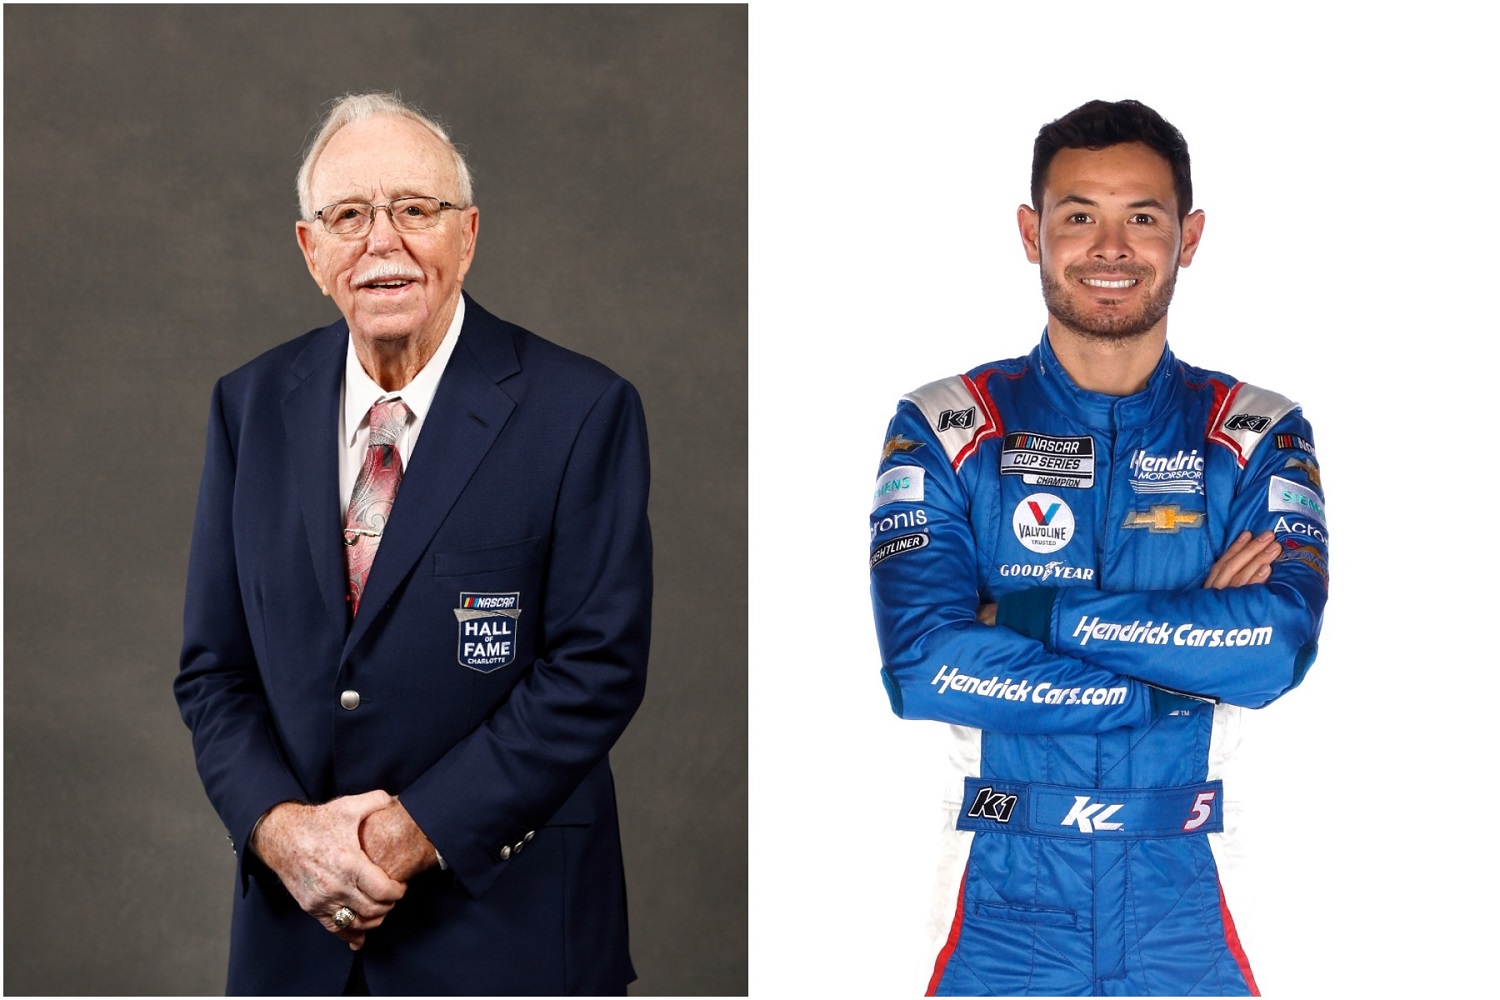 Red Farmer and Kyle Larson, NASCAR drivers.